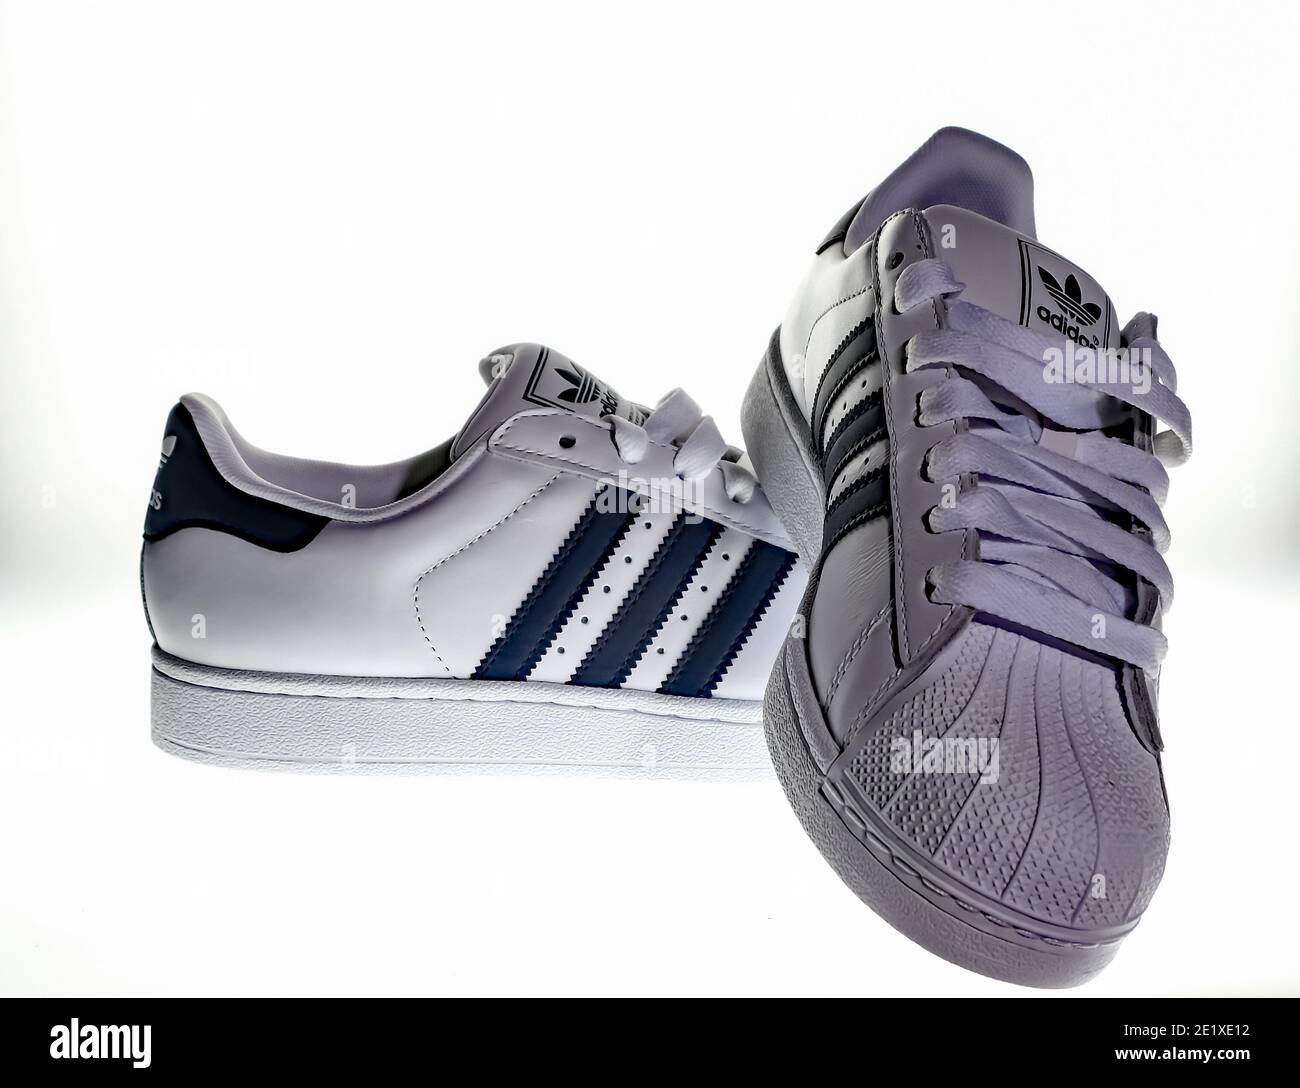 Adidas Trainers High Resolution Stock Photography and Images - Alamy